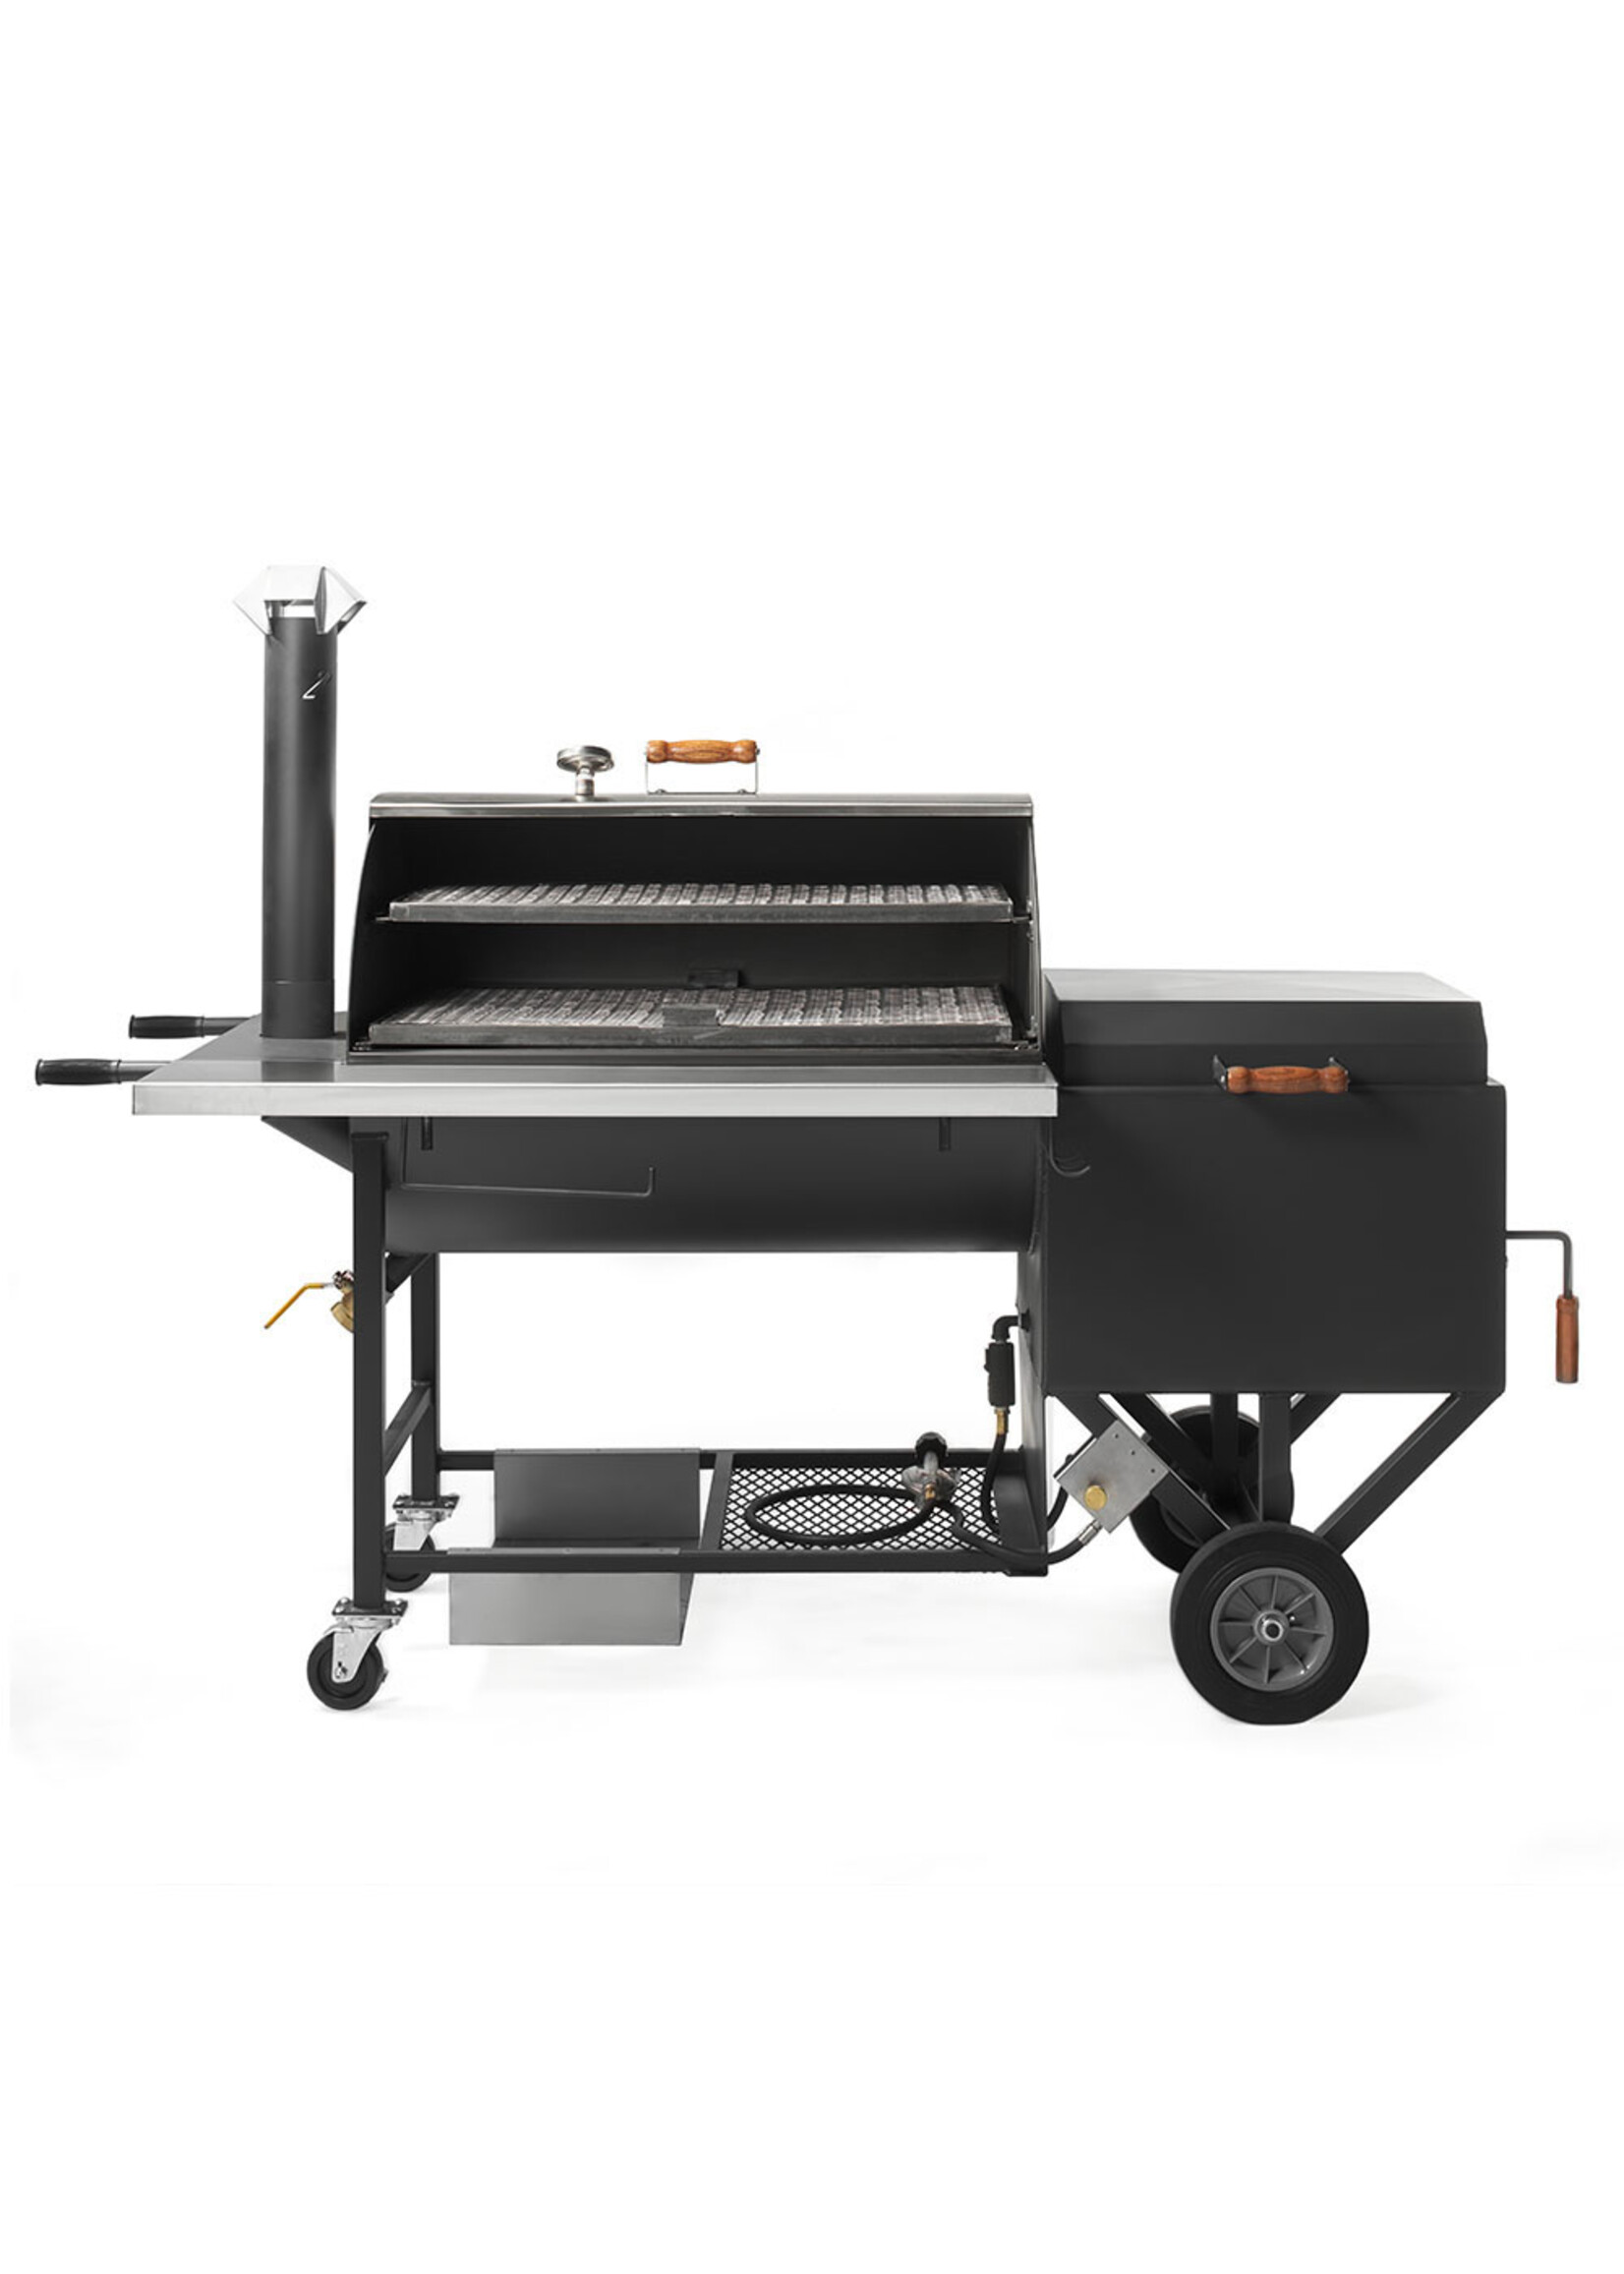 Pitts & Spitts Pitts & Spitts Ultimate Smoker Pit 24x36"